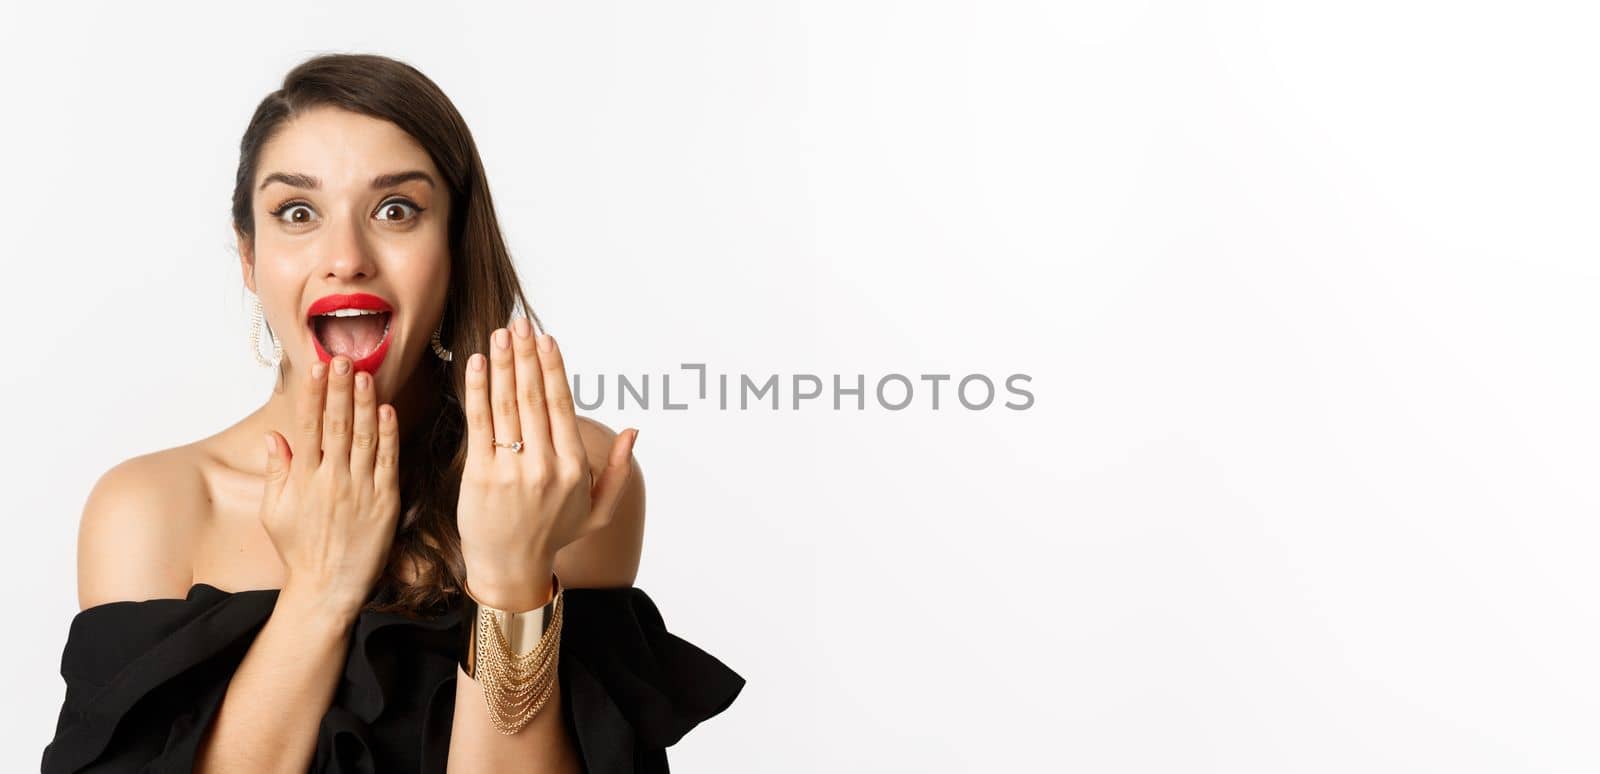 Excited woman showing engagement ring after saying yes to marriage proposal, bride looking excited, standing over white background.